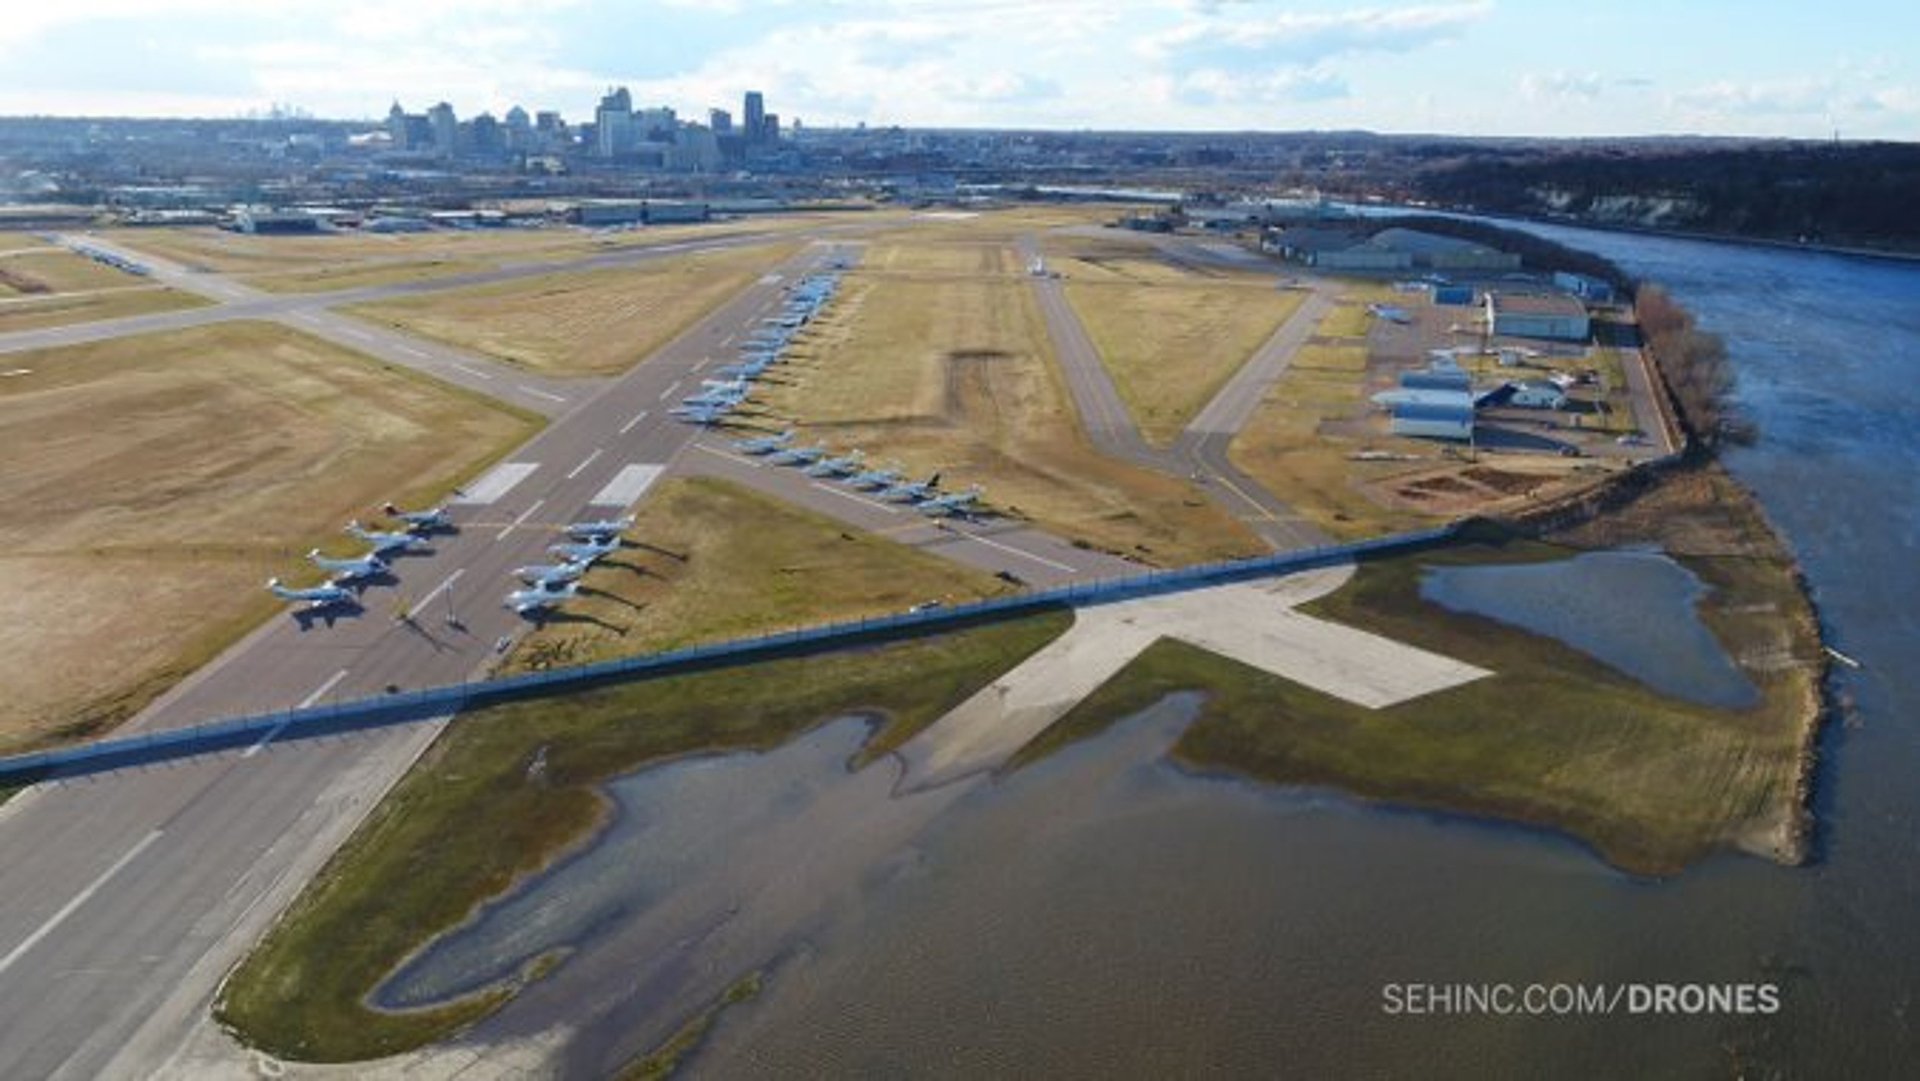 Drone photo of a flooded runway